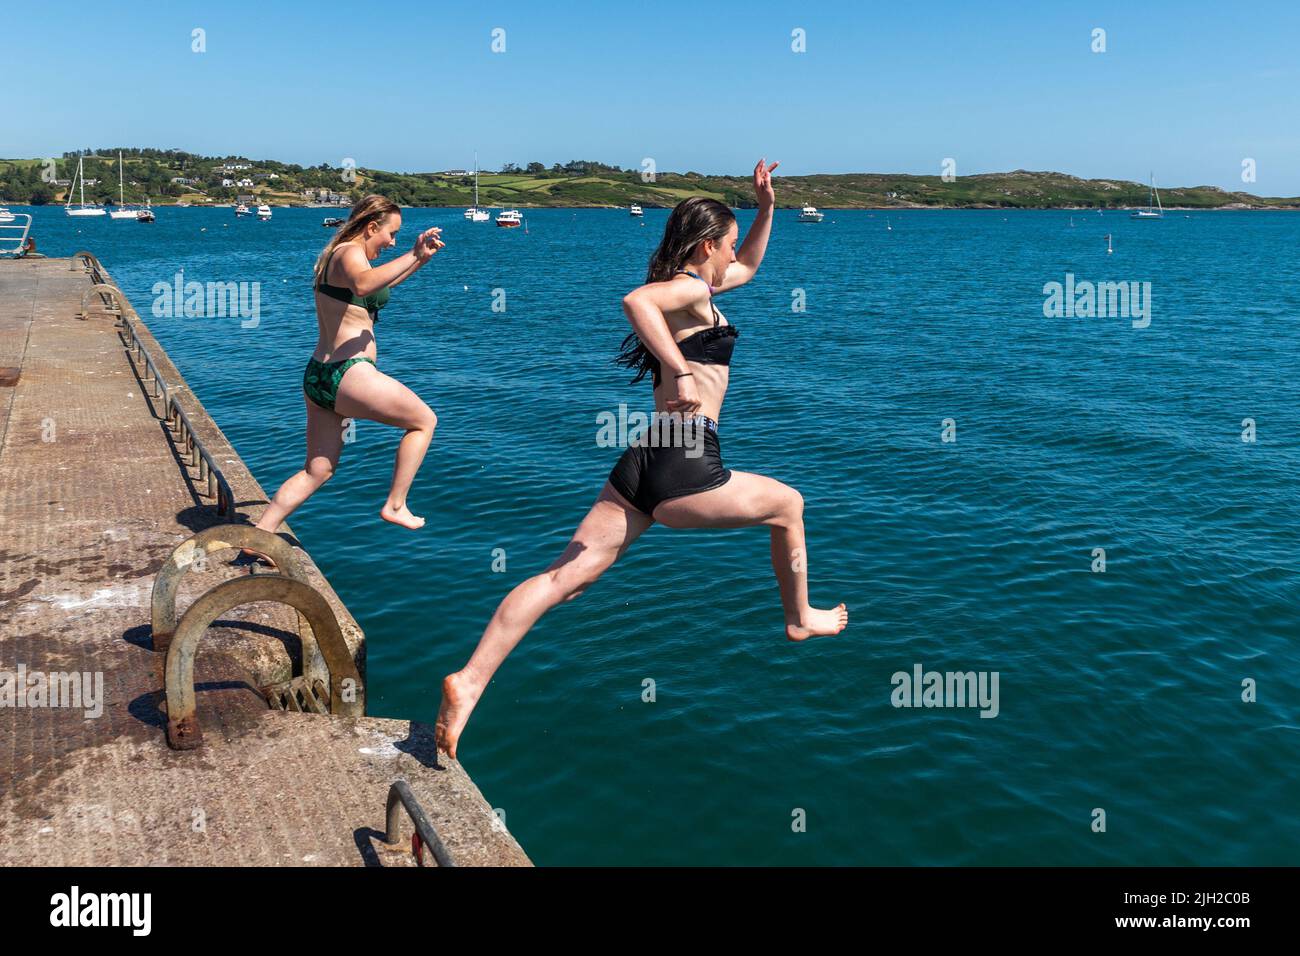 Schull, West Cork, Ireland. 14th July, 2022. The temperatures in West Cork hit 23C today, with many people heading for the coast to cool off. Jumping off Schull pier to cool down were Amelia Davies from Durrus and Amy Wilde from Schull. Credit: AG News/Alamy Live News Stock Photo